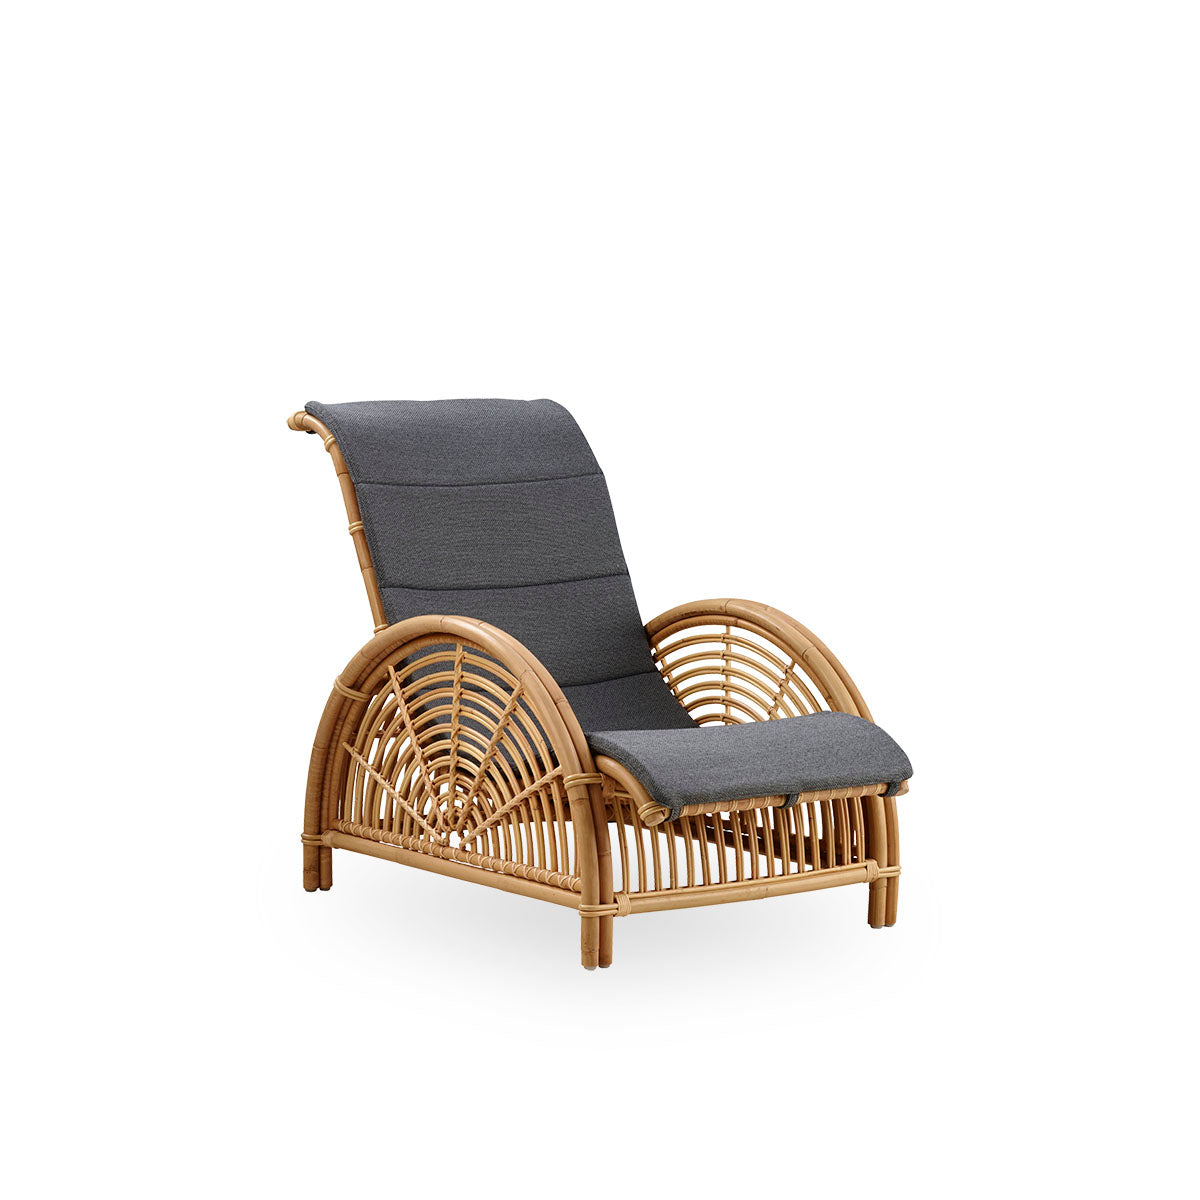 Paris Lounge Chair | Seat & back cushion by Sika